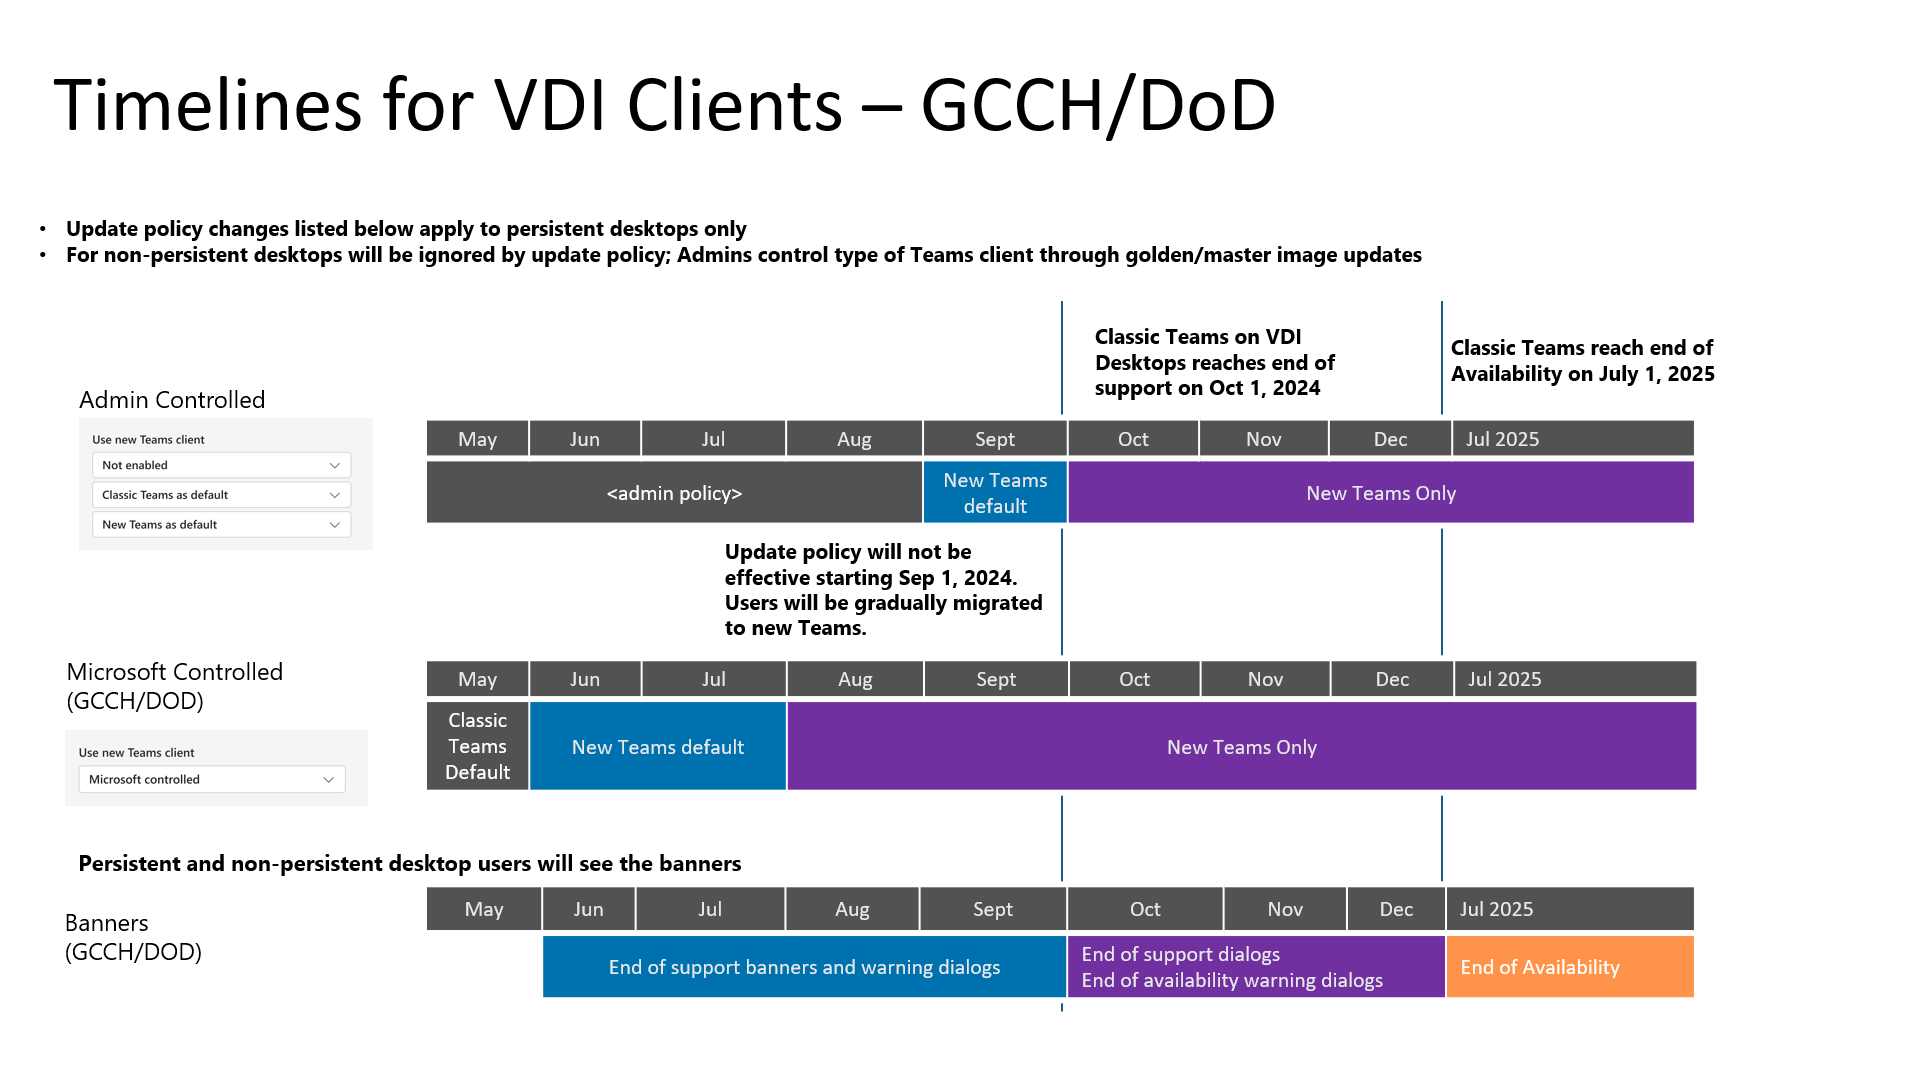 A chart showing the timelines for classic Teams to new Teams for VDI, specific to GCCH and DoD tenants.